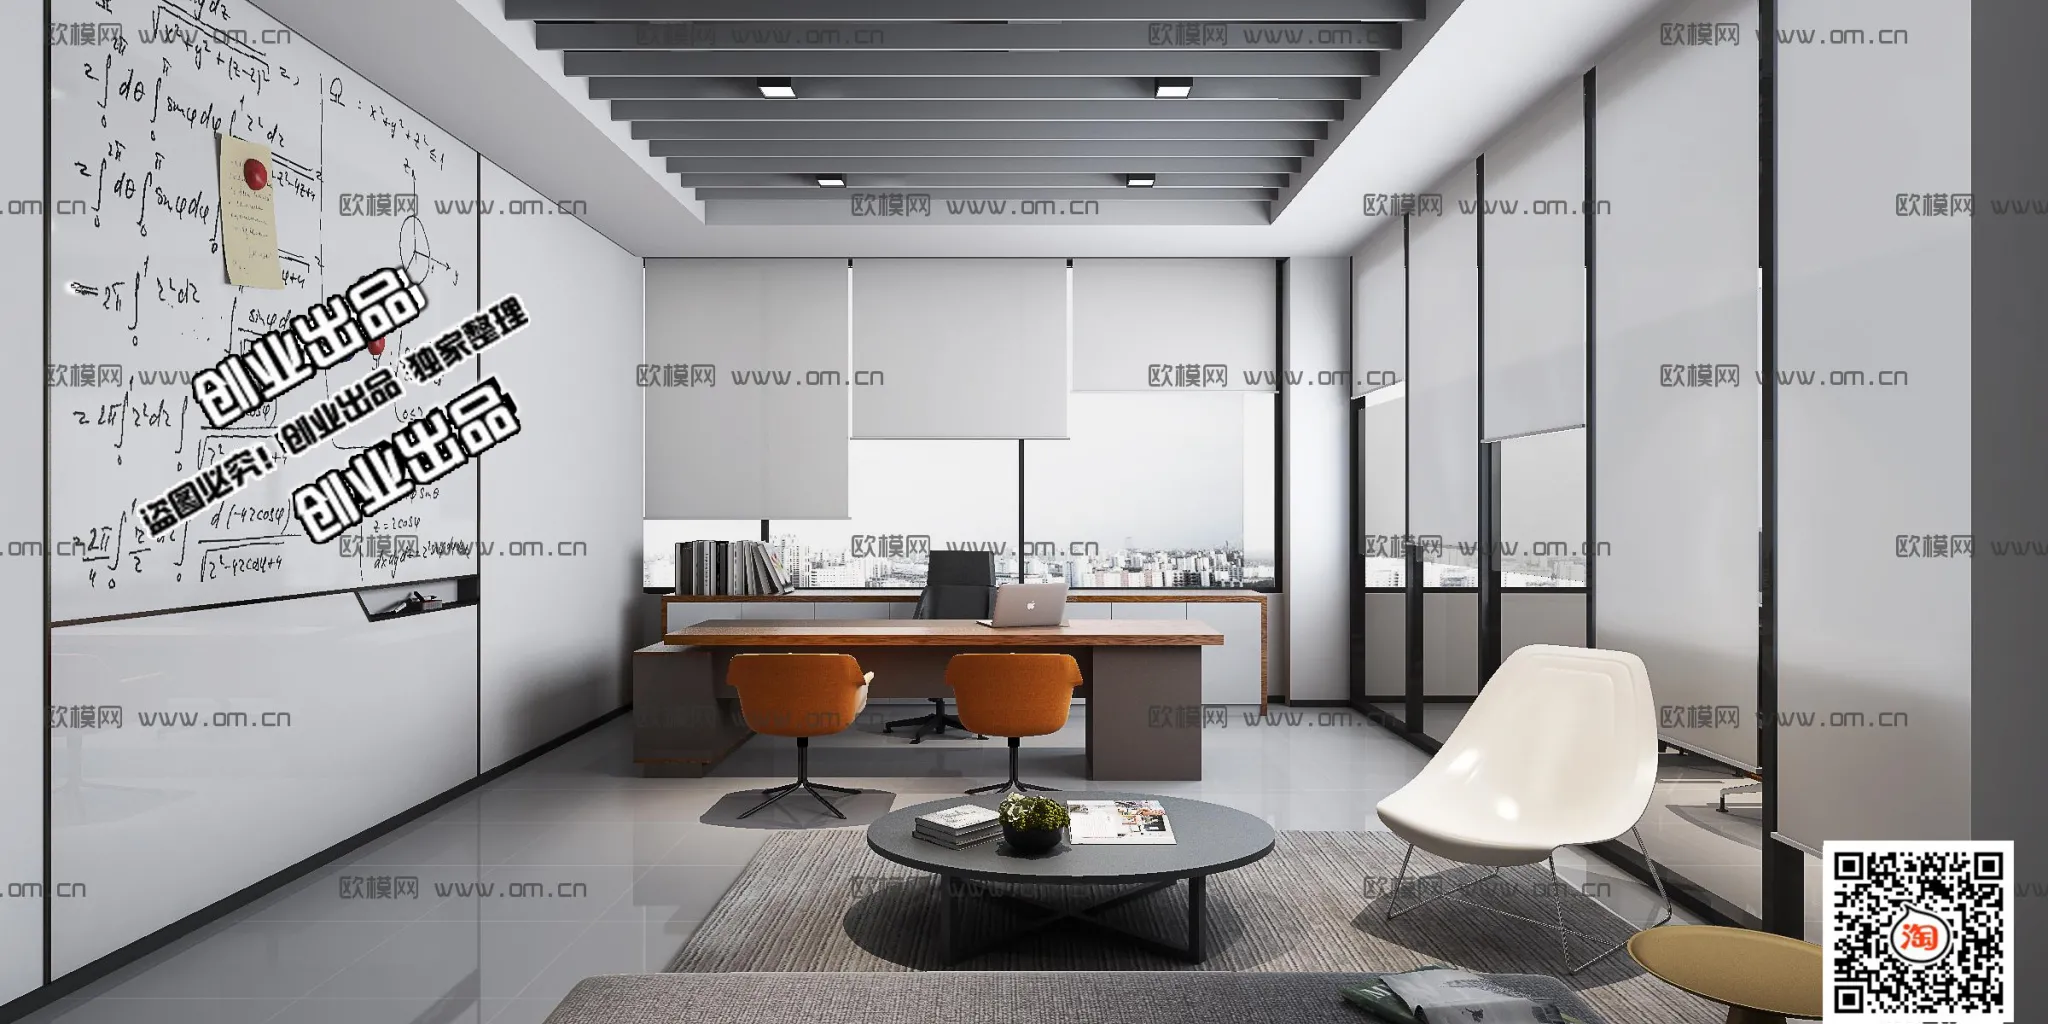 3D OFFICE INTERIOR (VRAY) – MANAGER ROOM 3D SCENES – 047